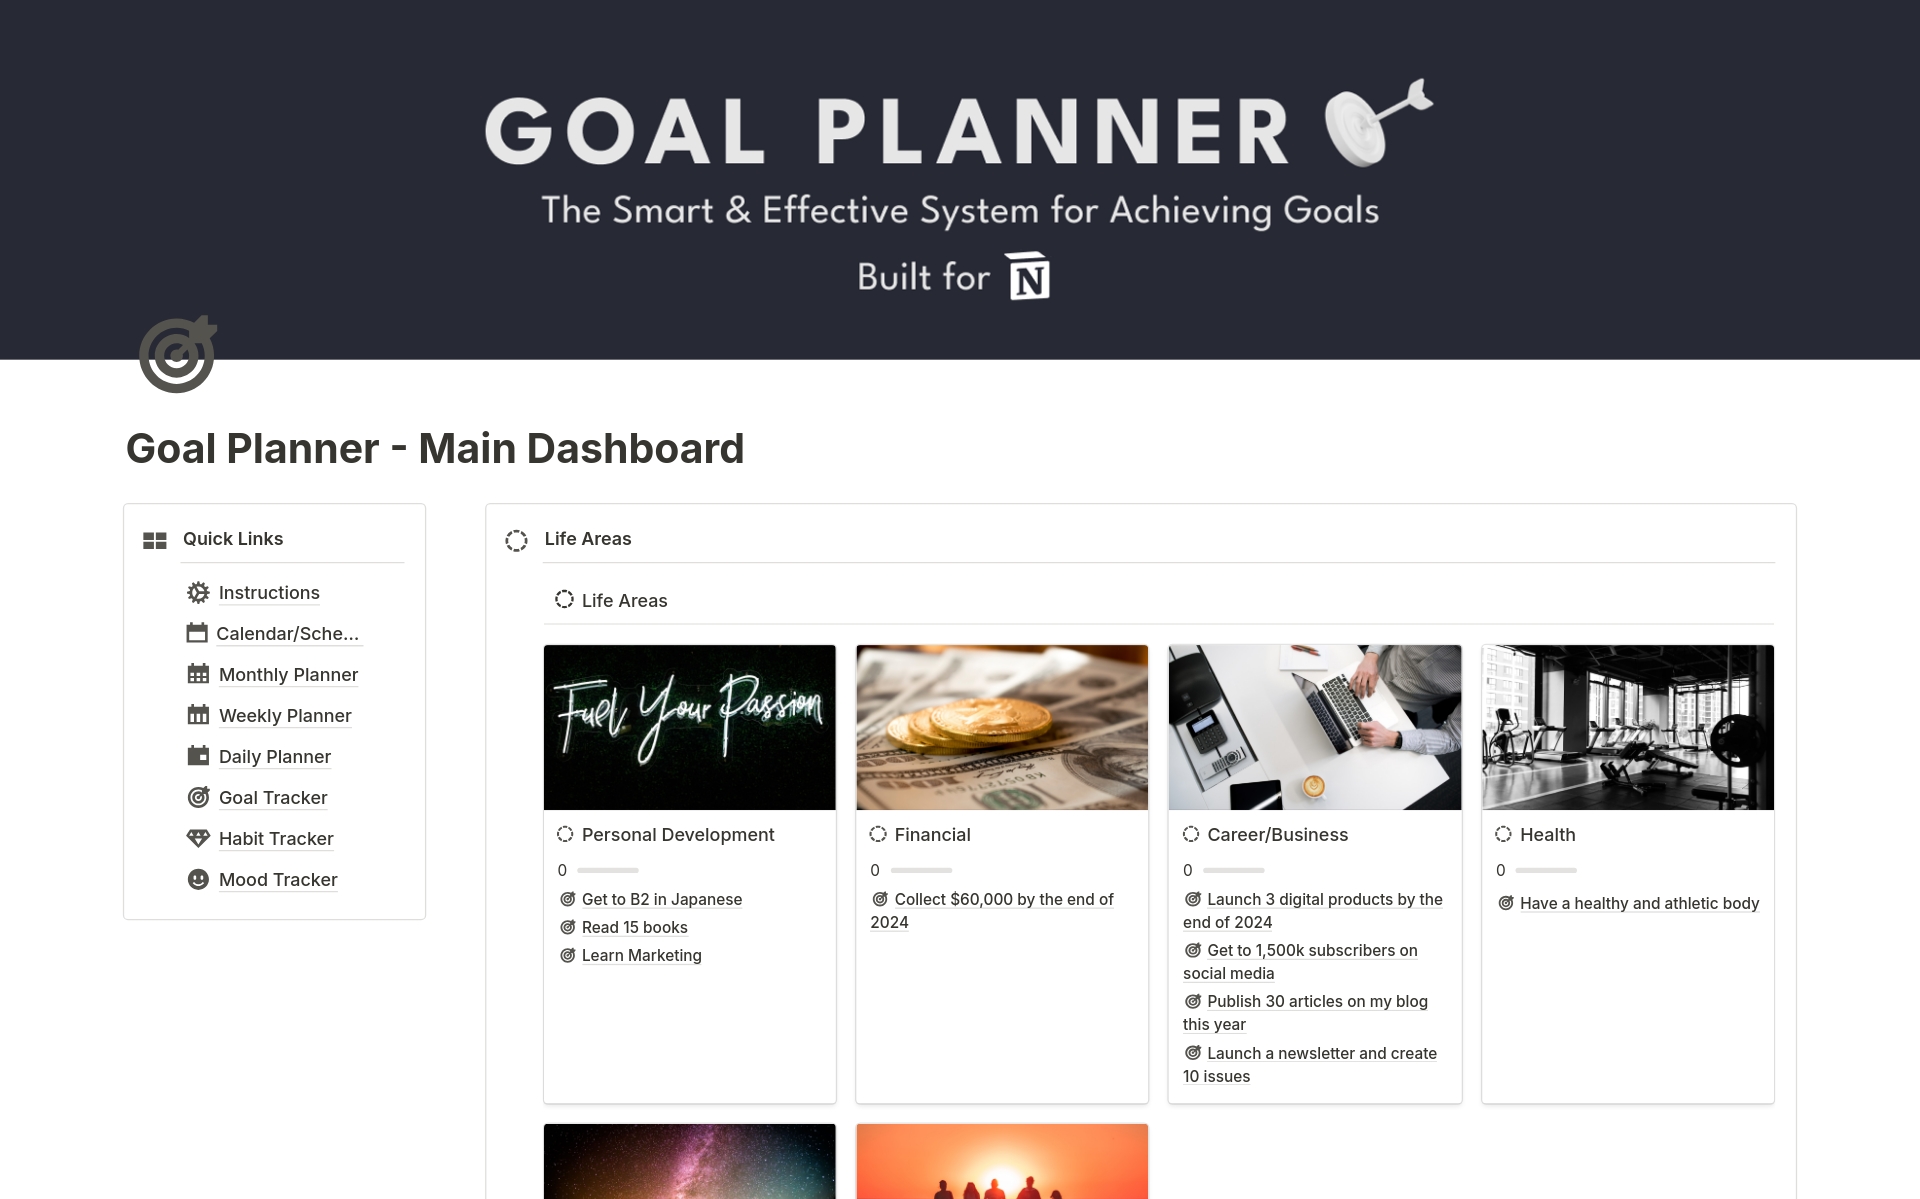 Goal Planner is your all-in-one system for achieving your goals. 

Break down big goals, track progress visually, and stay organized with monthly, weekly & daily planners. 

It's perfect for everyone! Crush your goals, while tracking your habits and mood along your journey. 